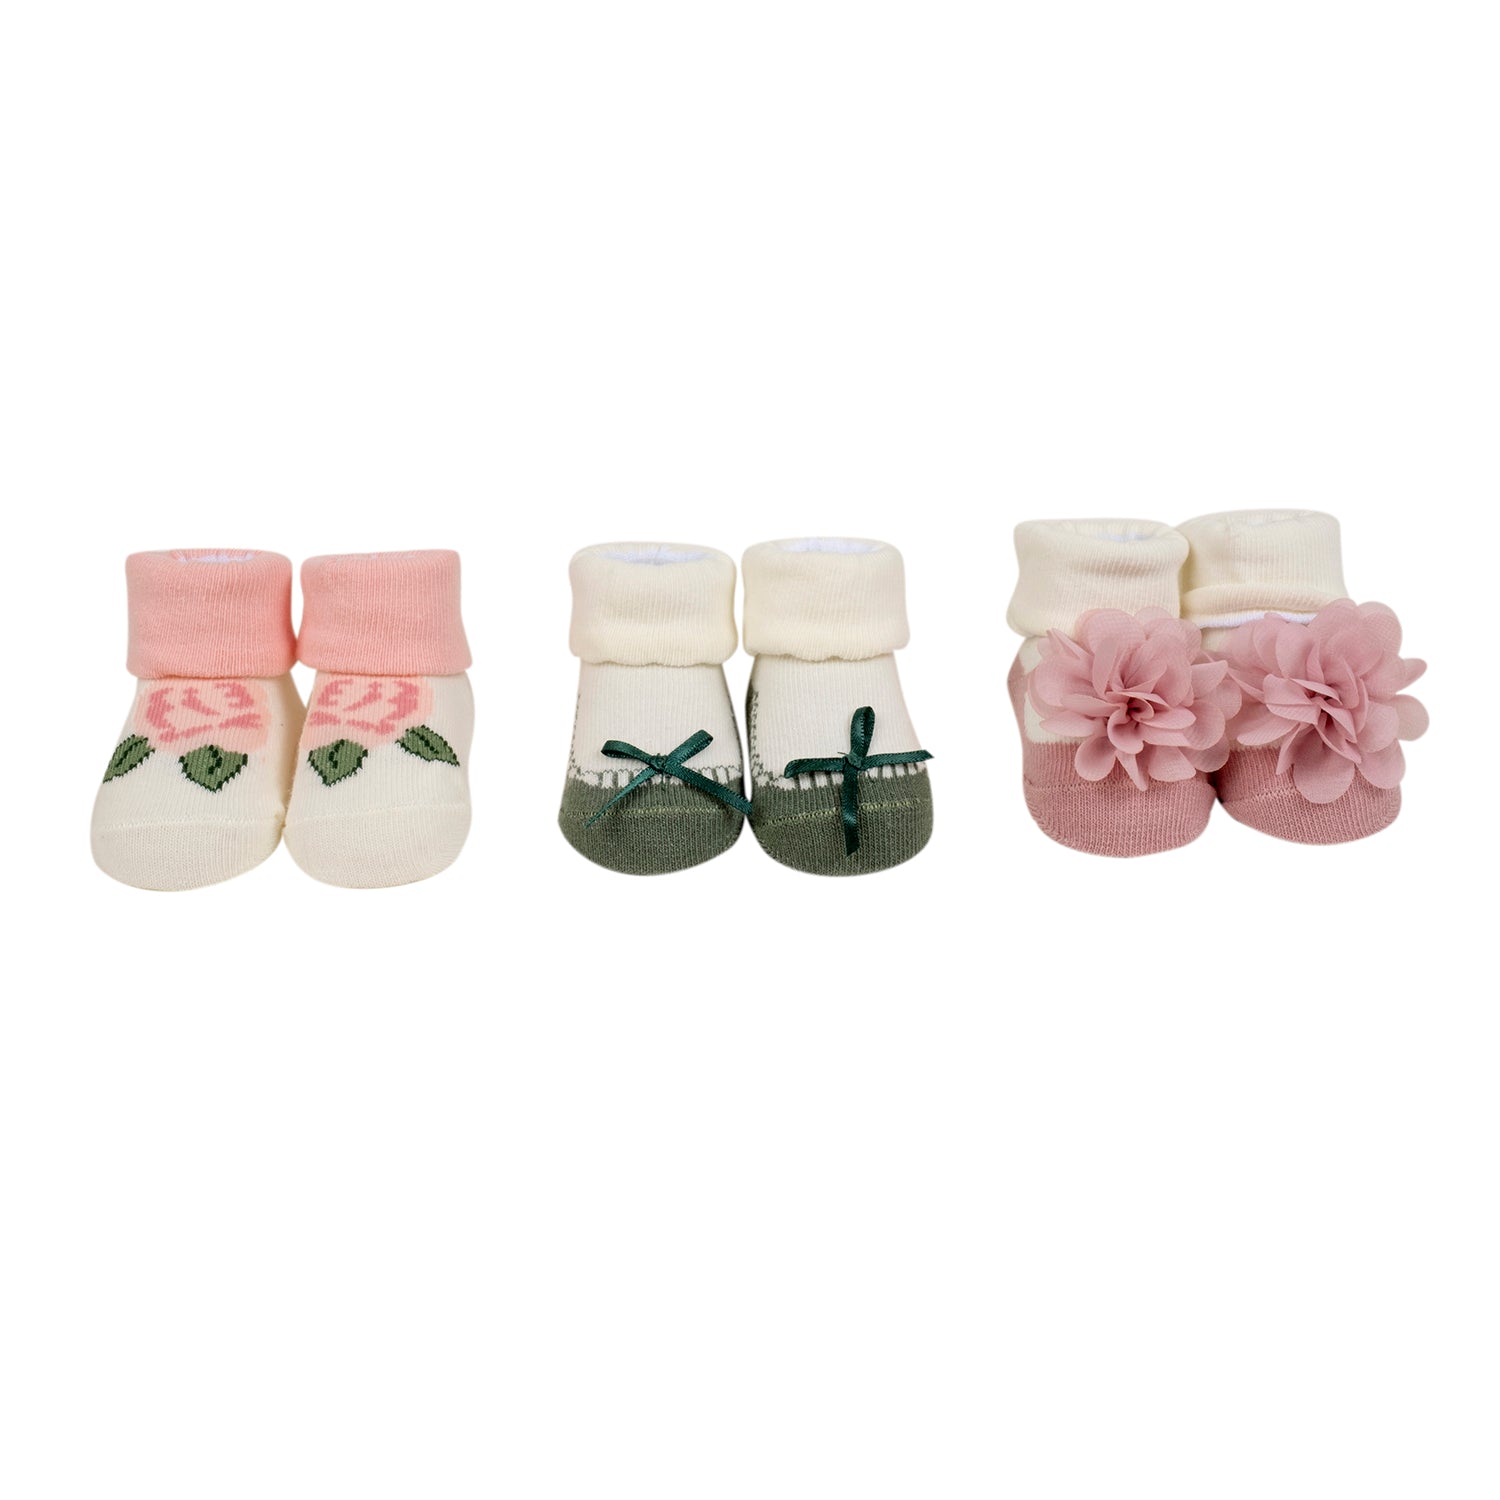 Baby Moo Bow Striped Infant 6-Piece Gift Hairband And Socks Set - Pink